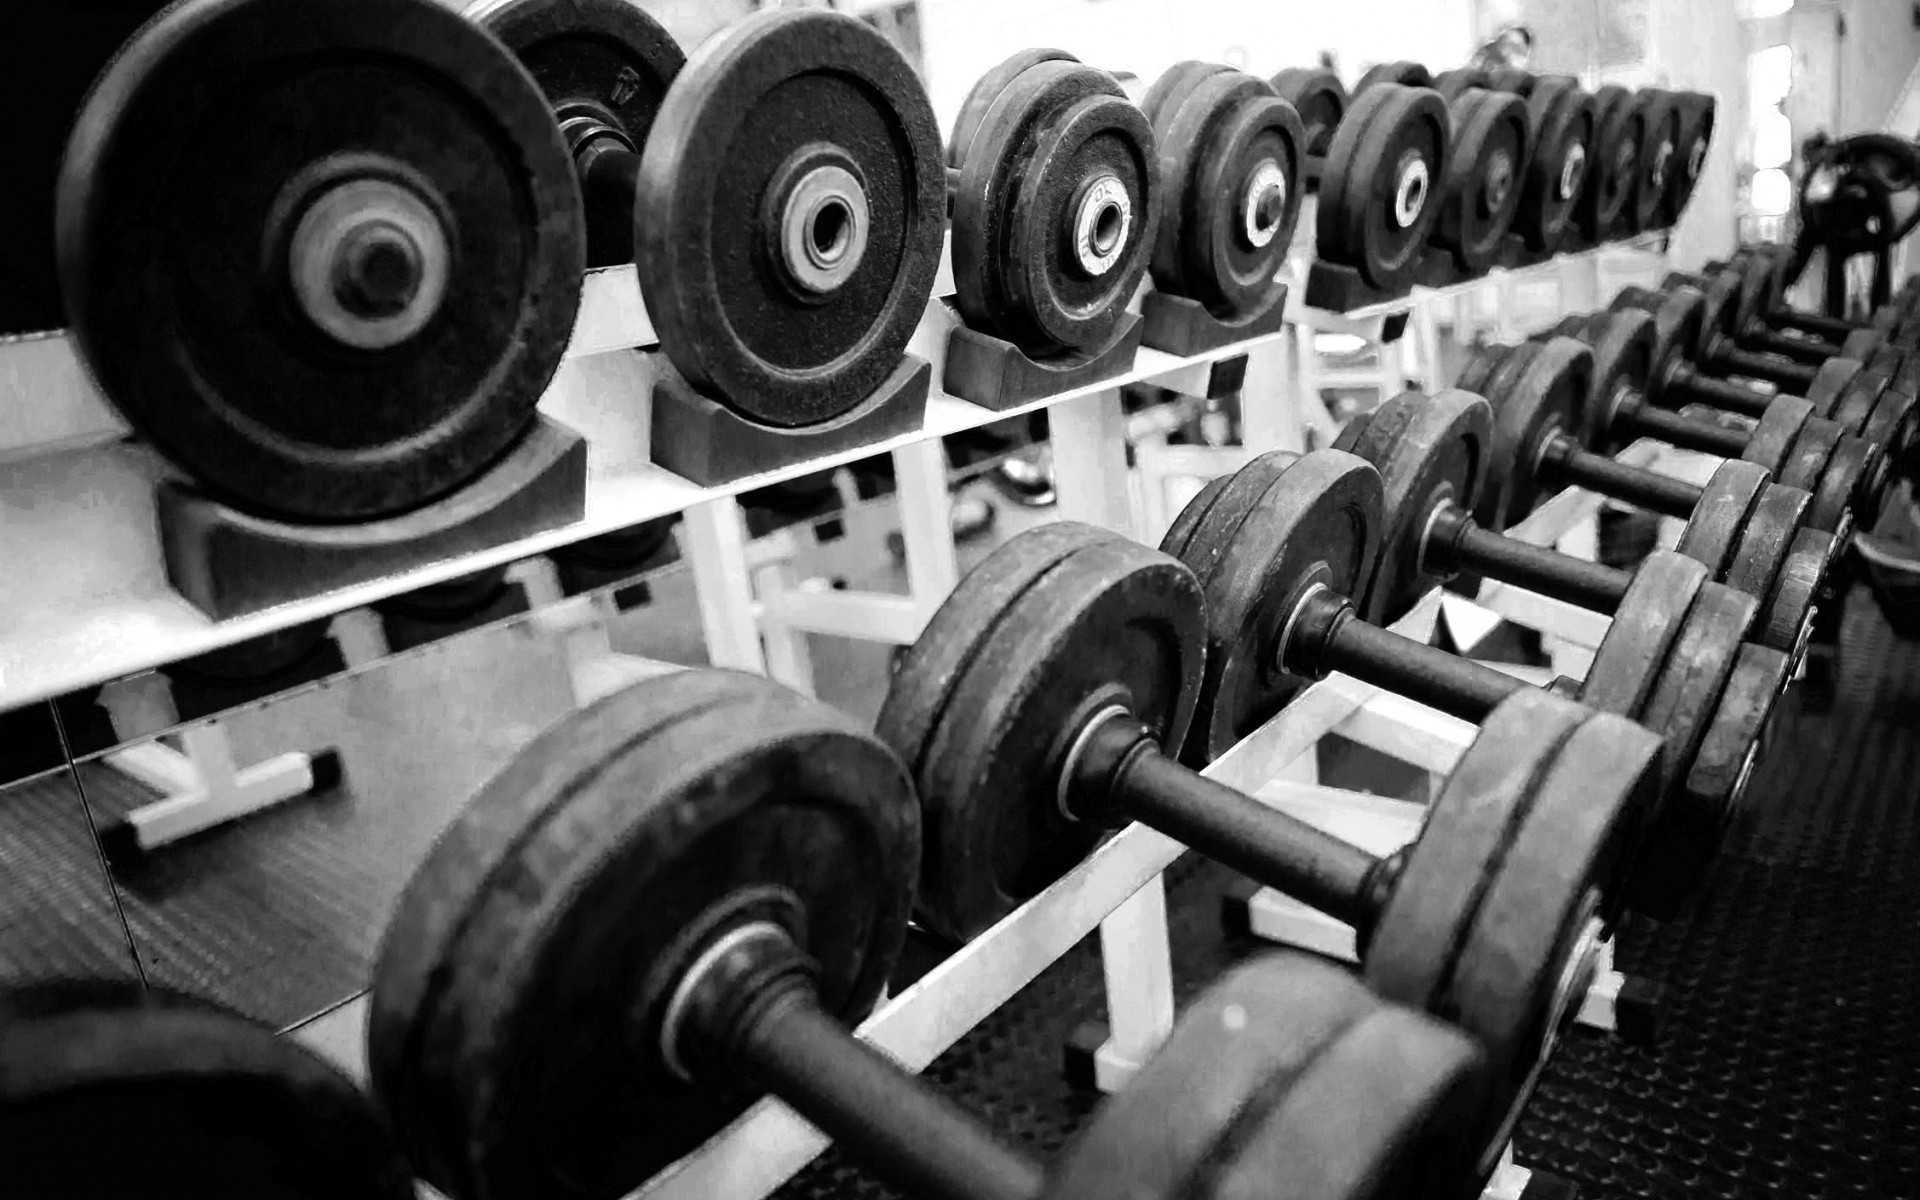 Wallpaper Download 1920x1200 Dumbbells in a gym